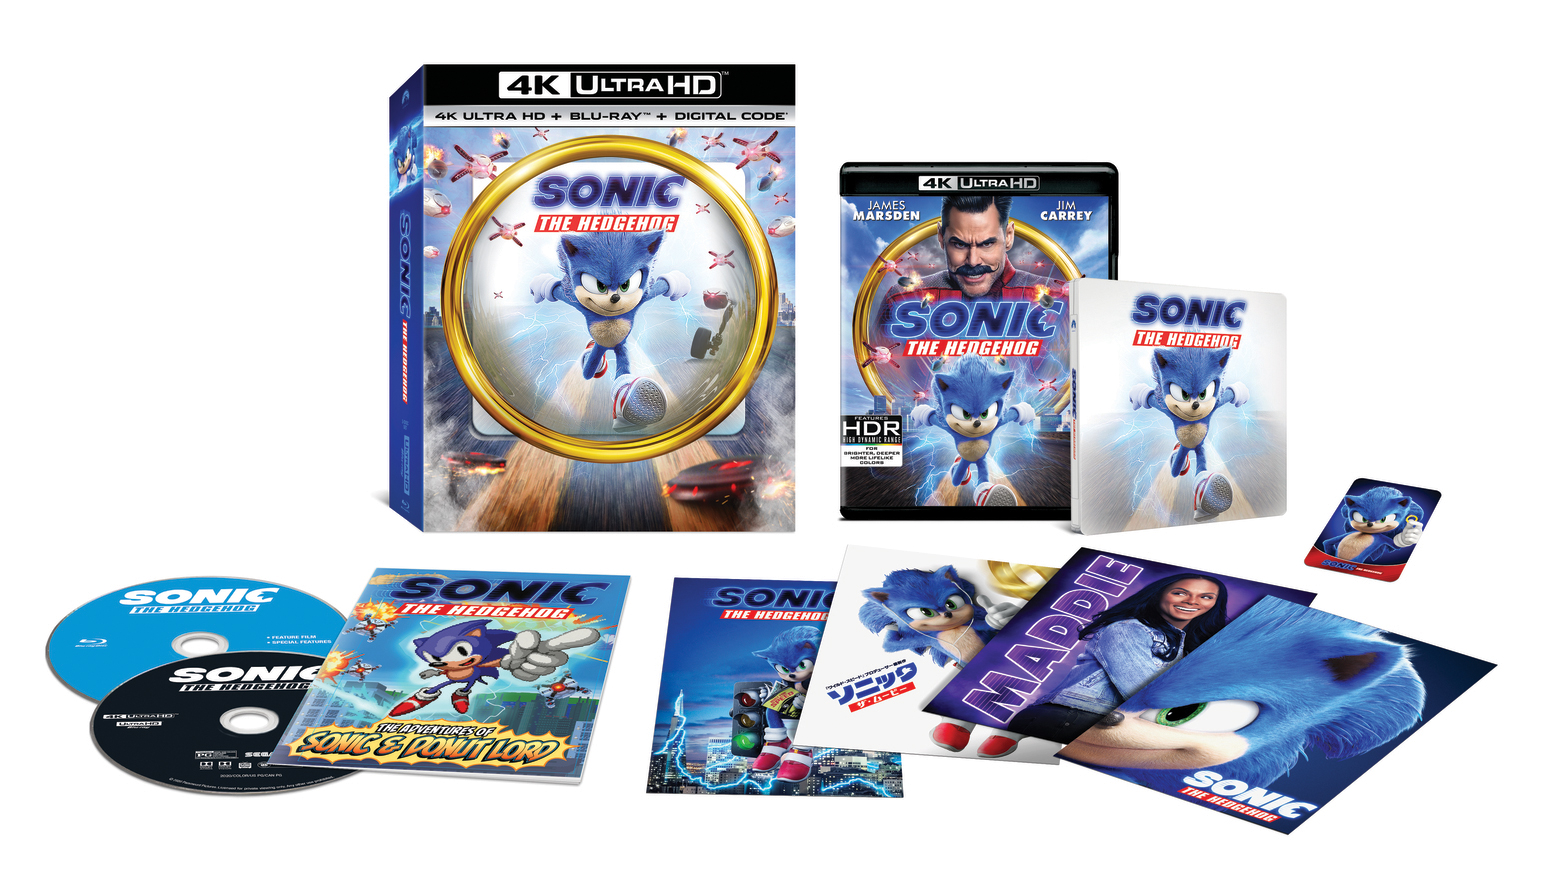 Sonic the Hedgehog (Blu-ray, 2020) for sale online